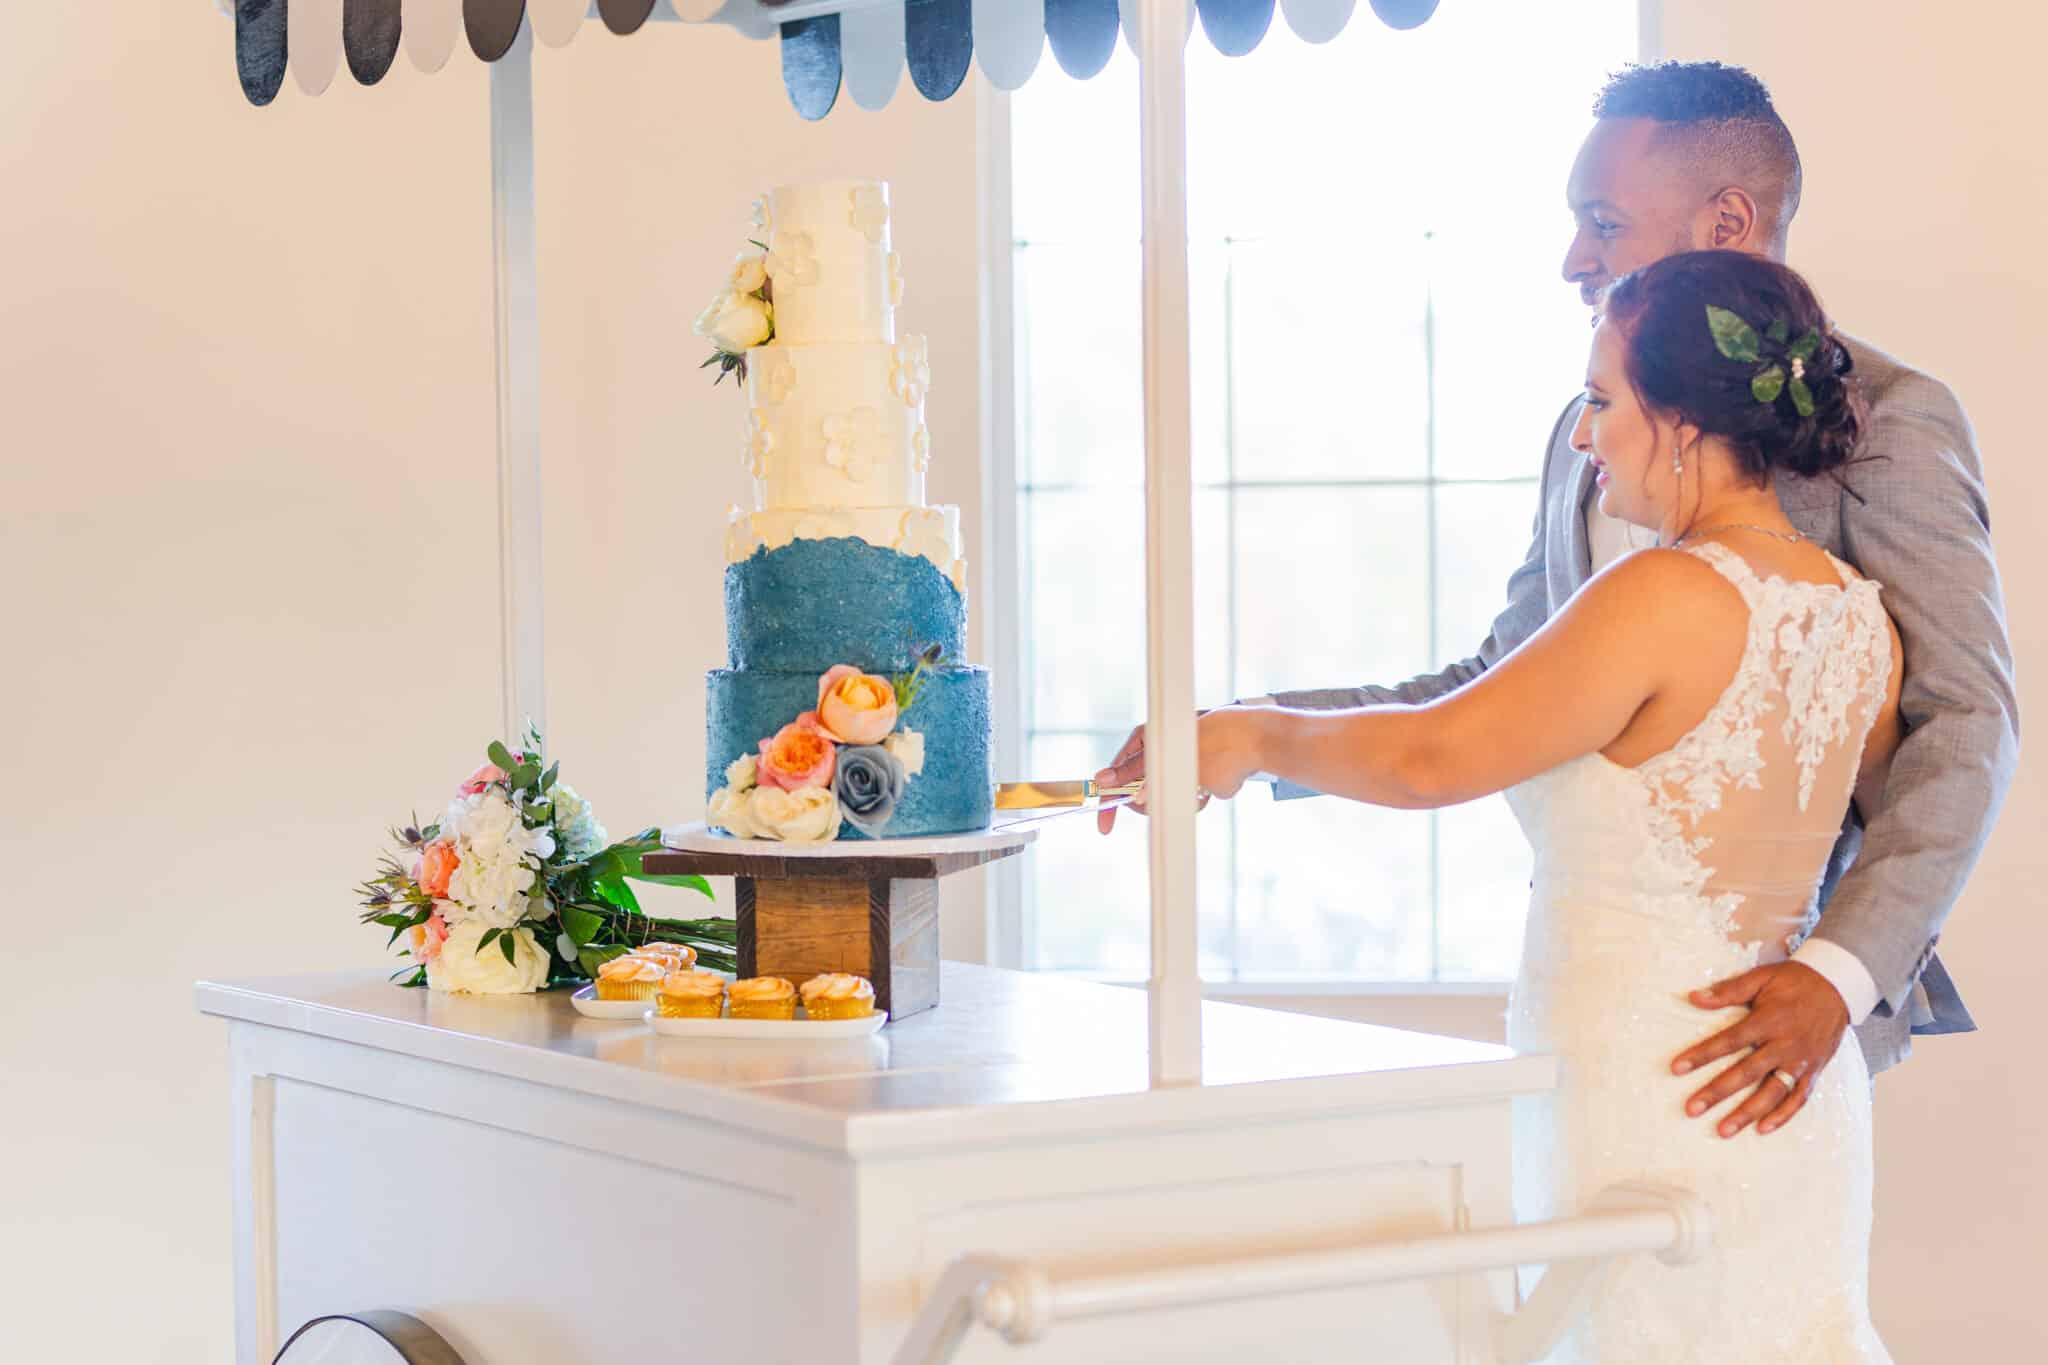 couple stands together cutting wedding cake decorated with flowers and blue and white icing